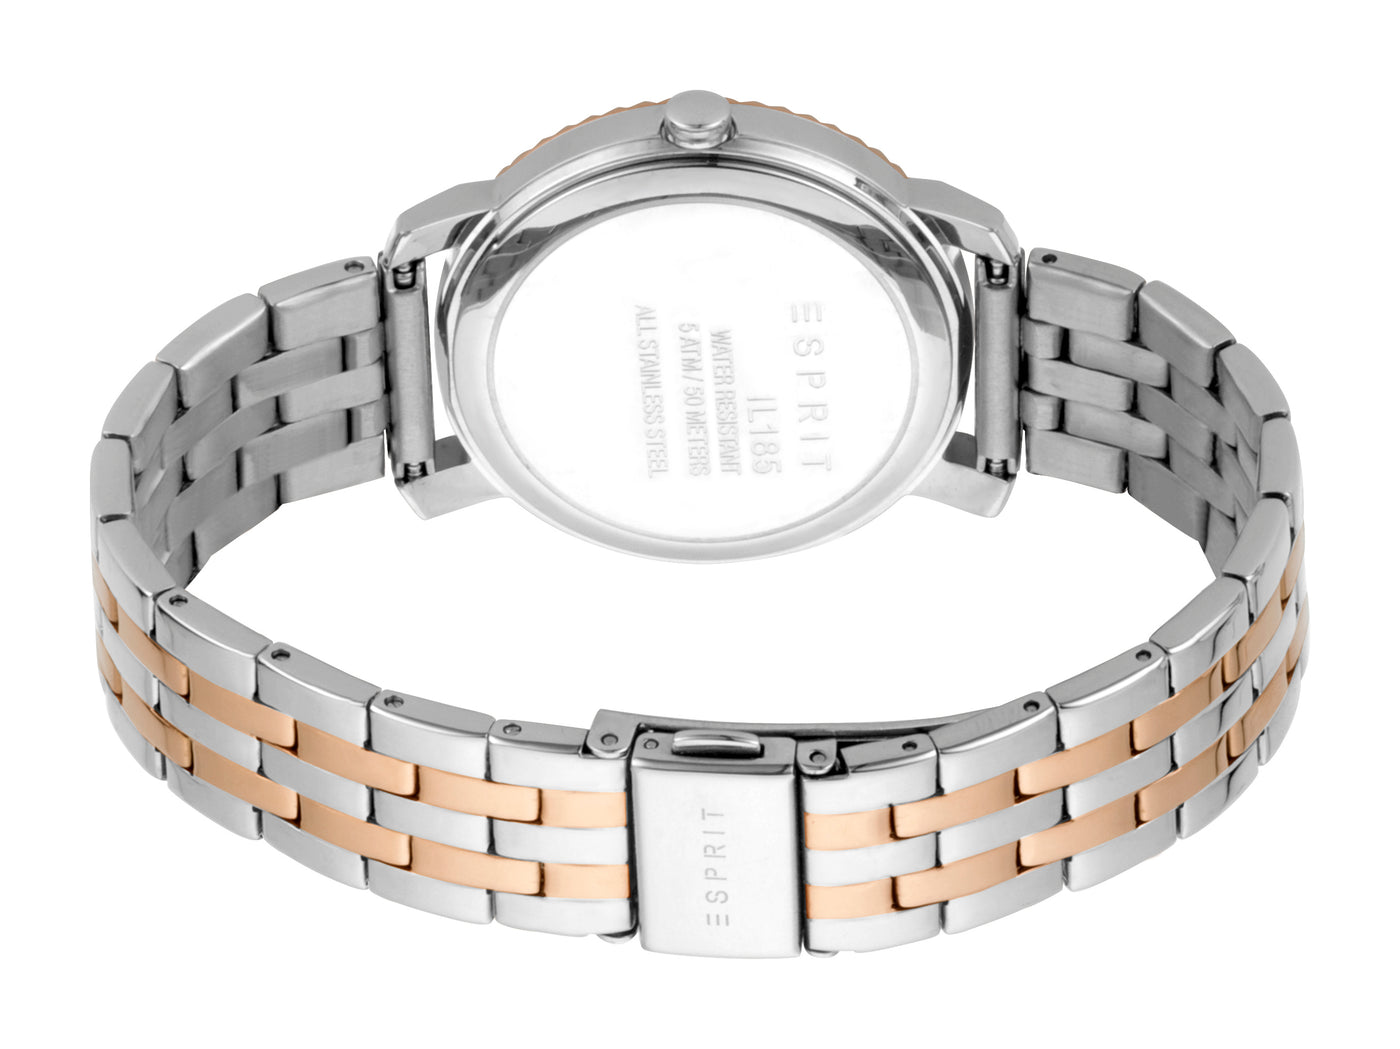 Menlo 3-Hand 36mm Stainless Steel Band